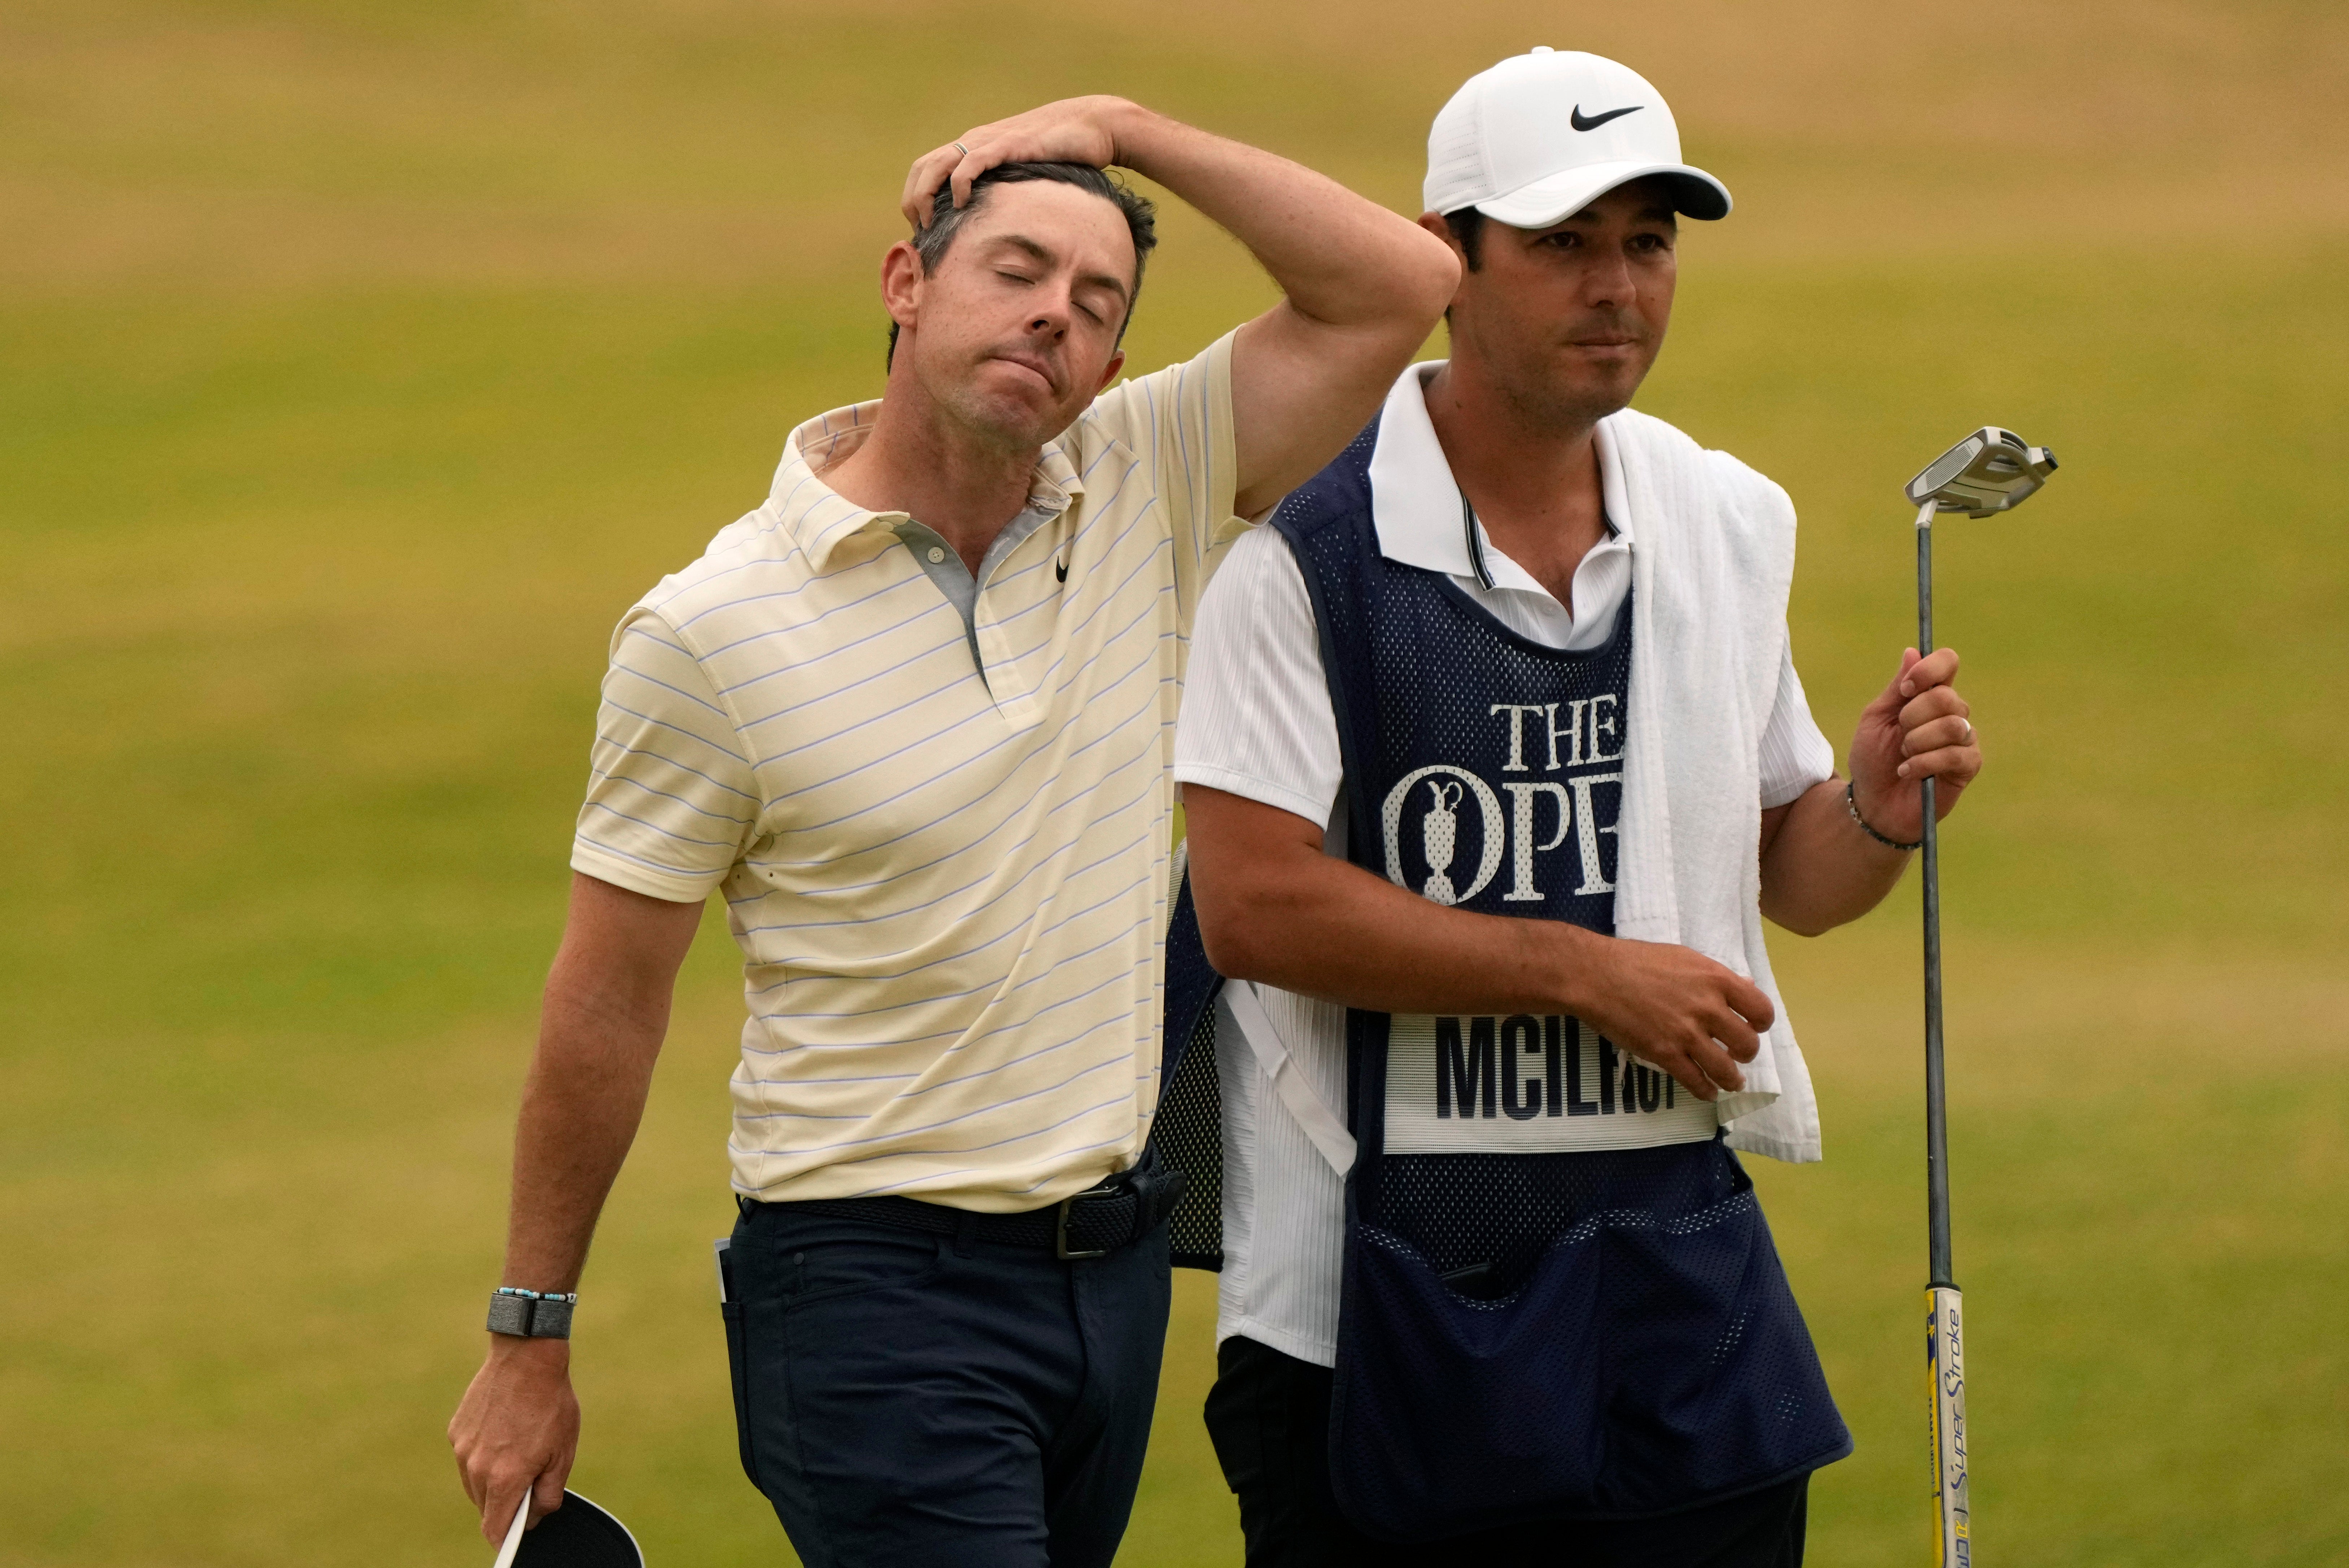 ‘I got beaten by the better man,’ McIlroy admitted